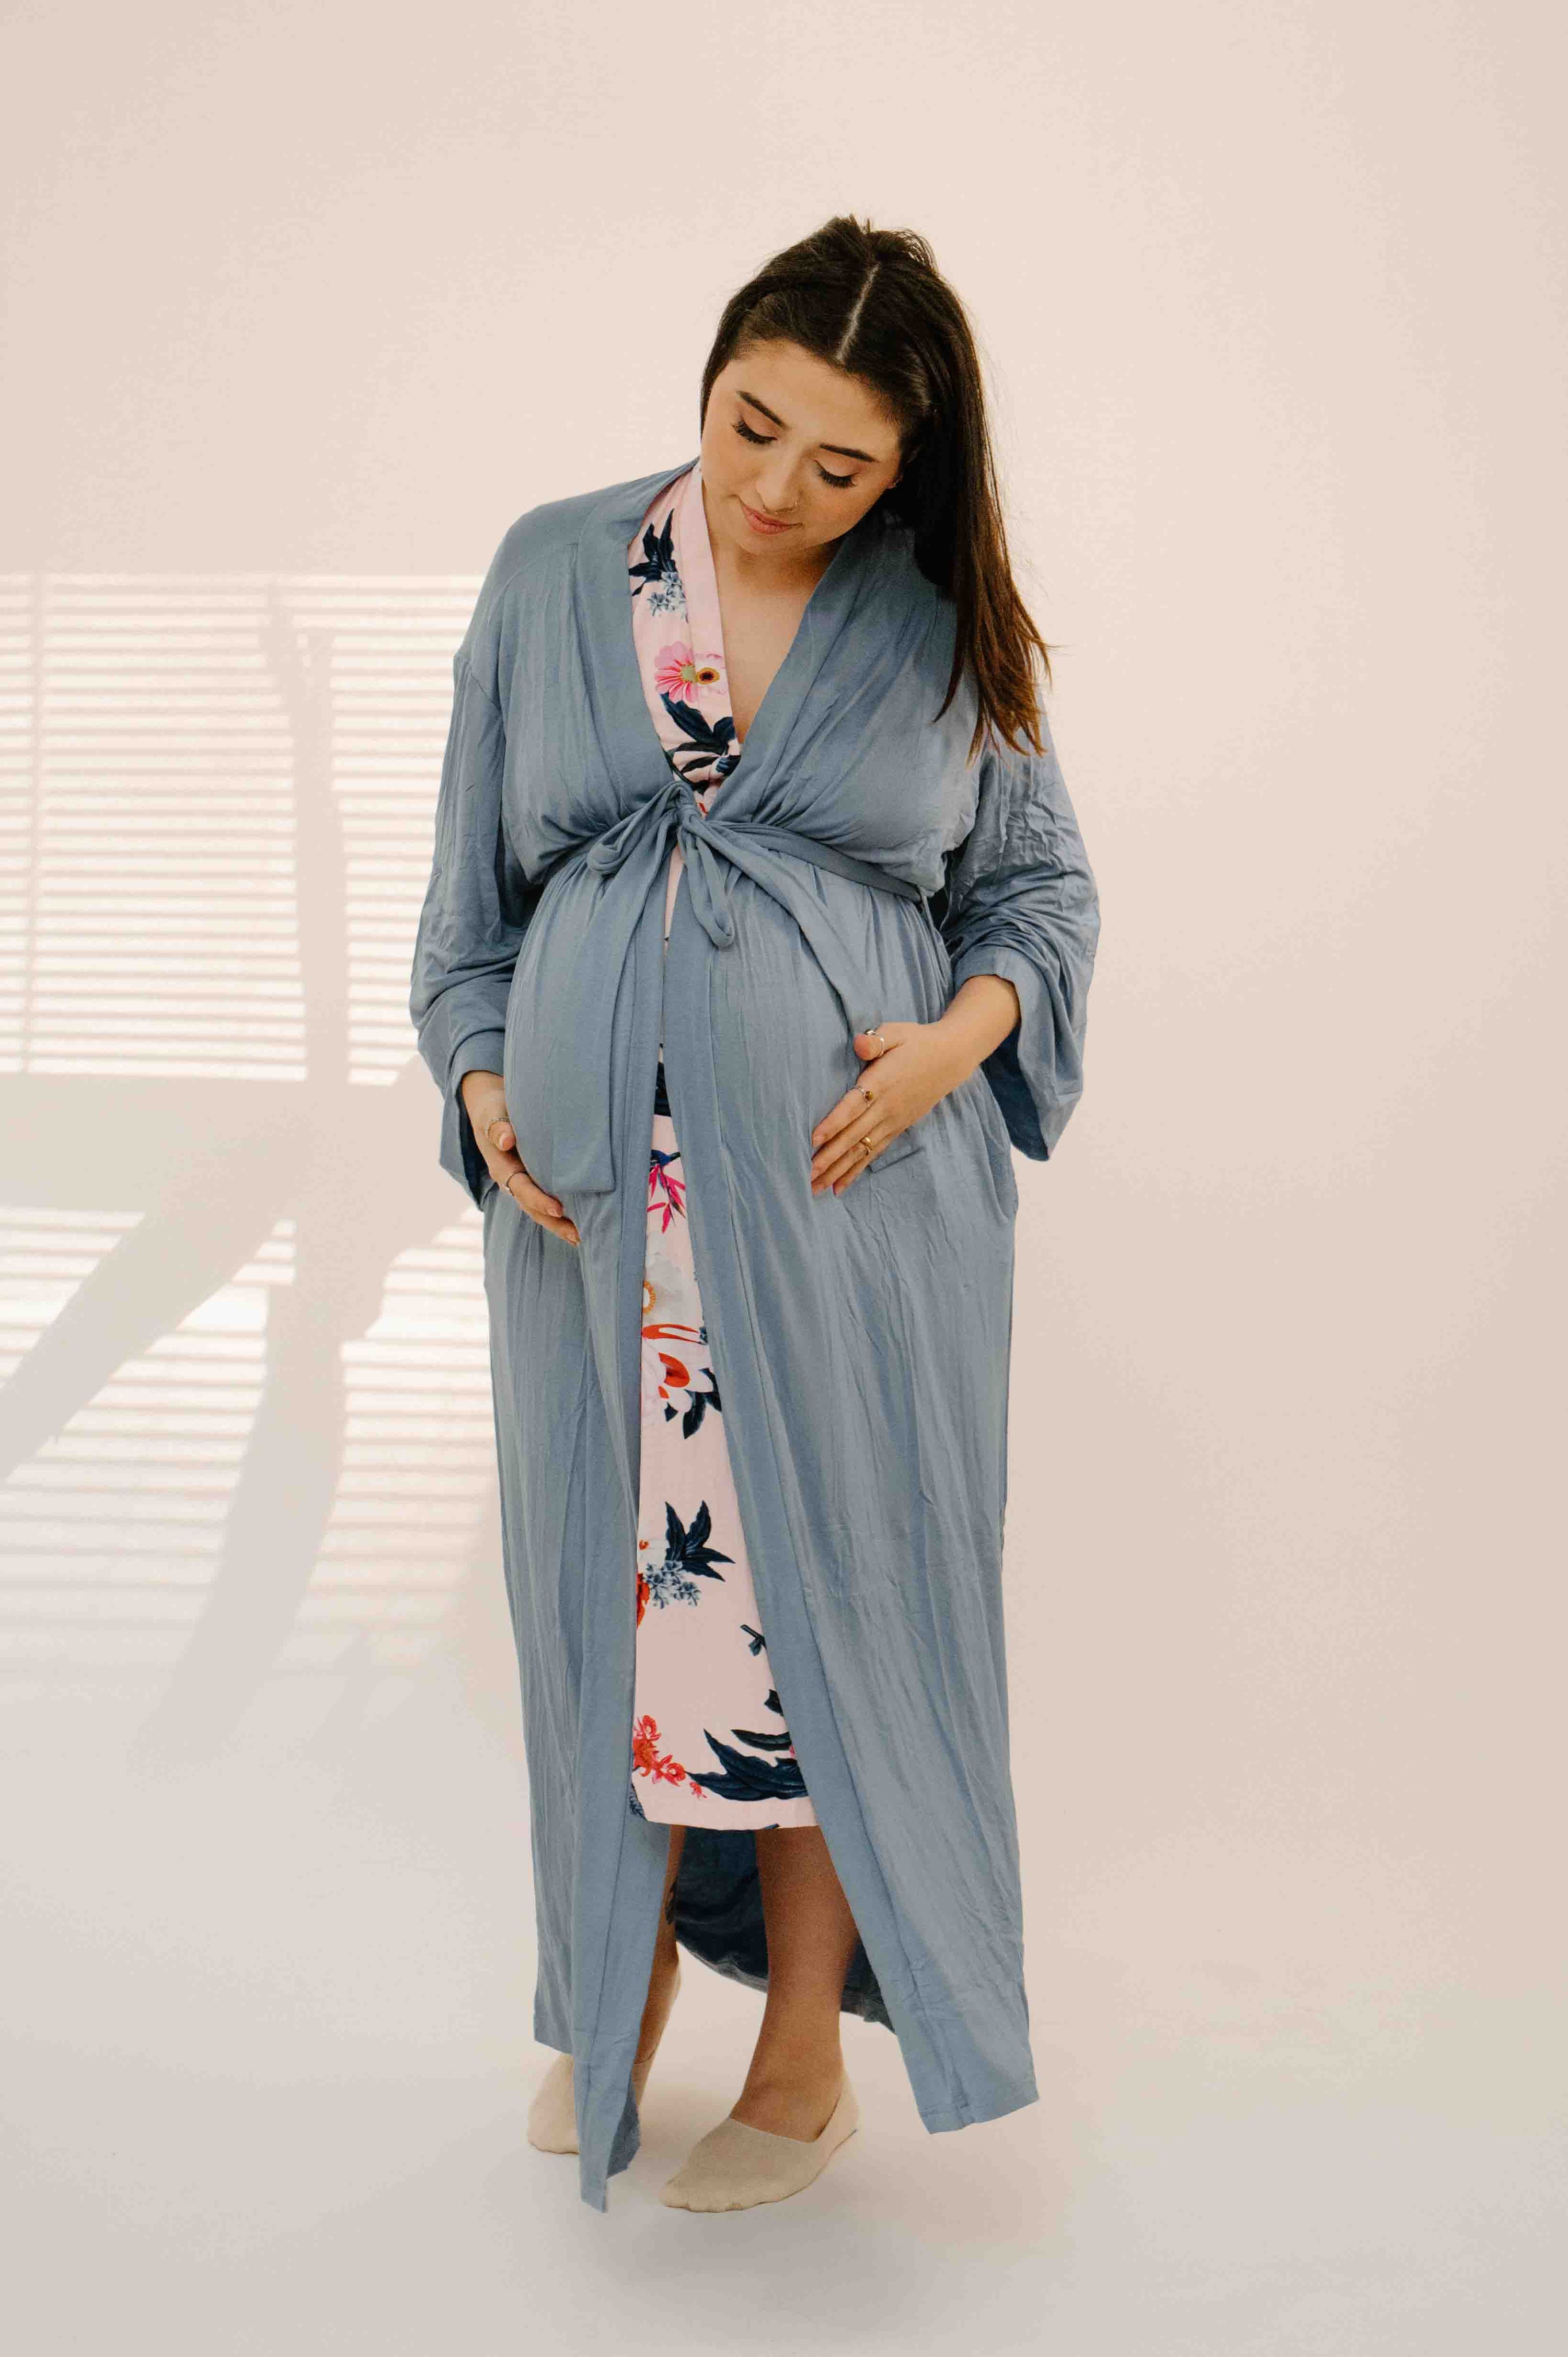 Robes in Periwinkle Blue